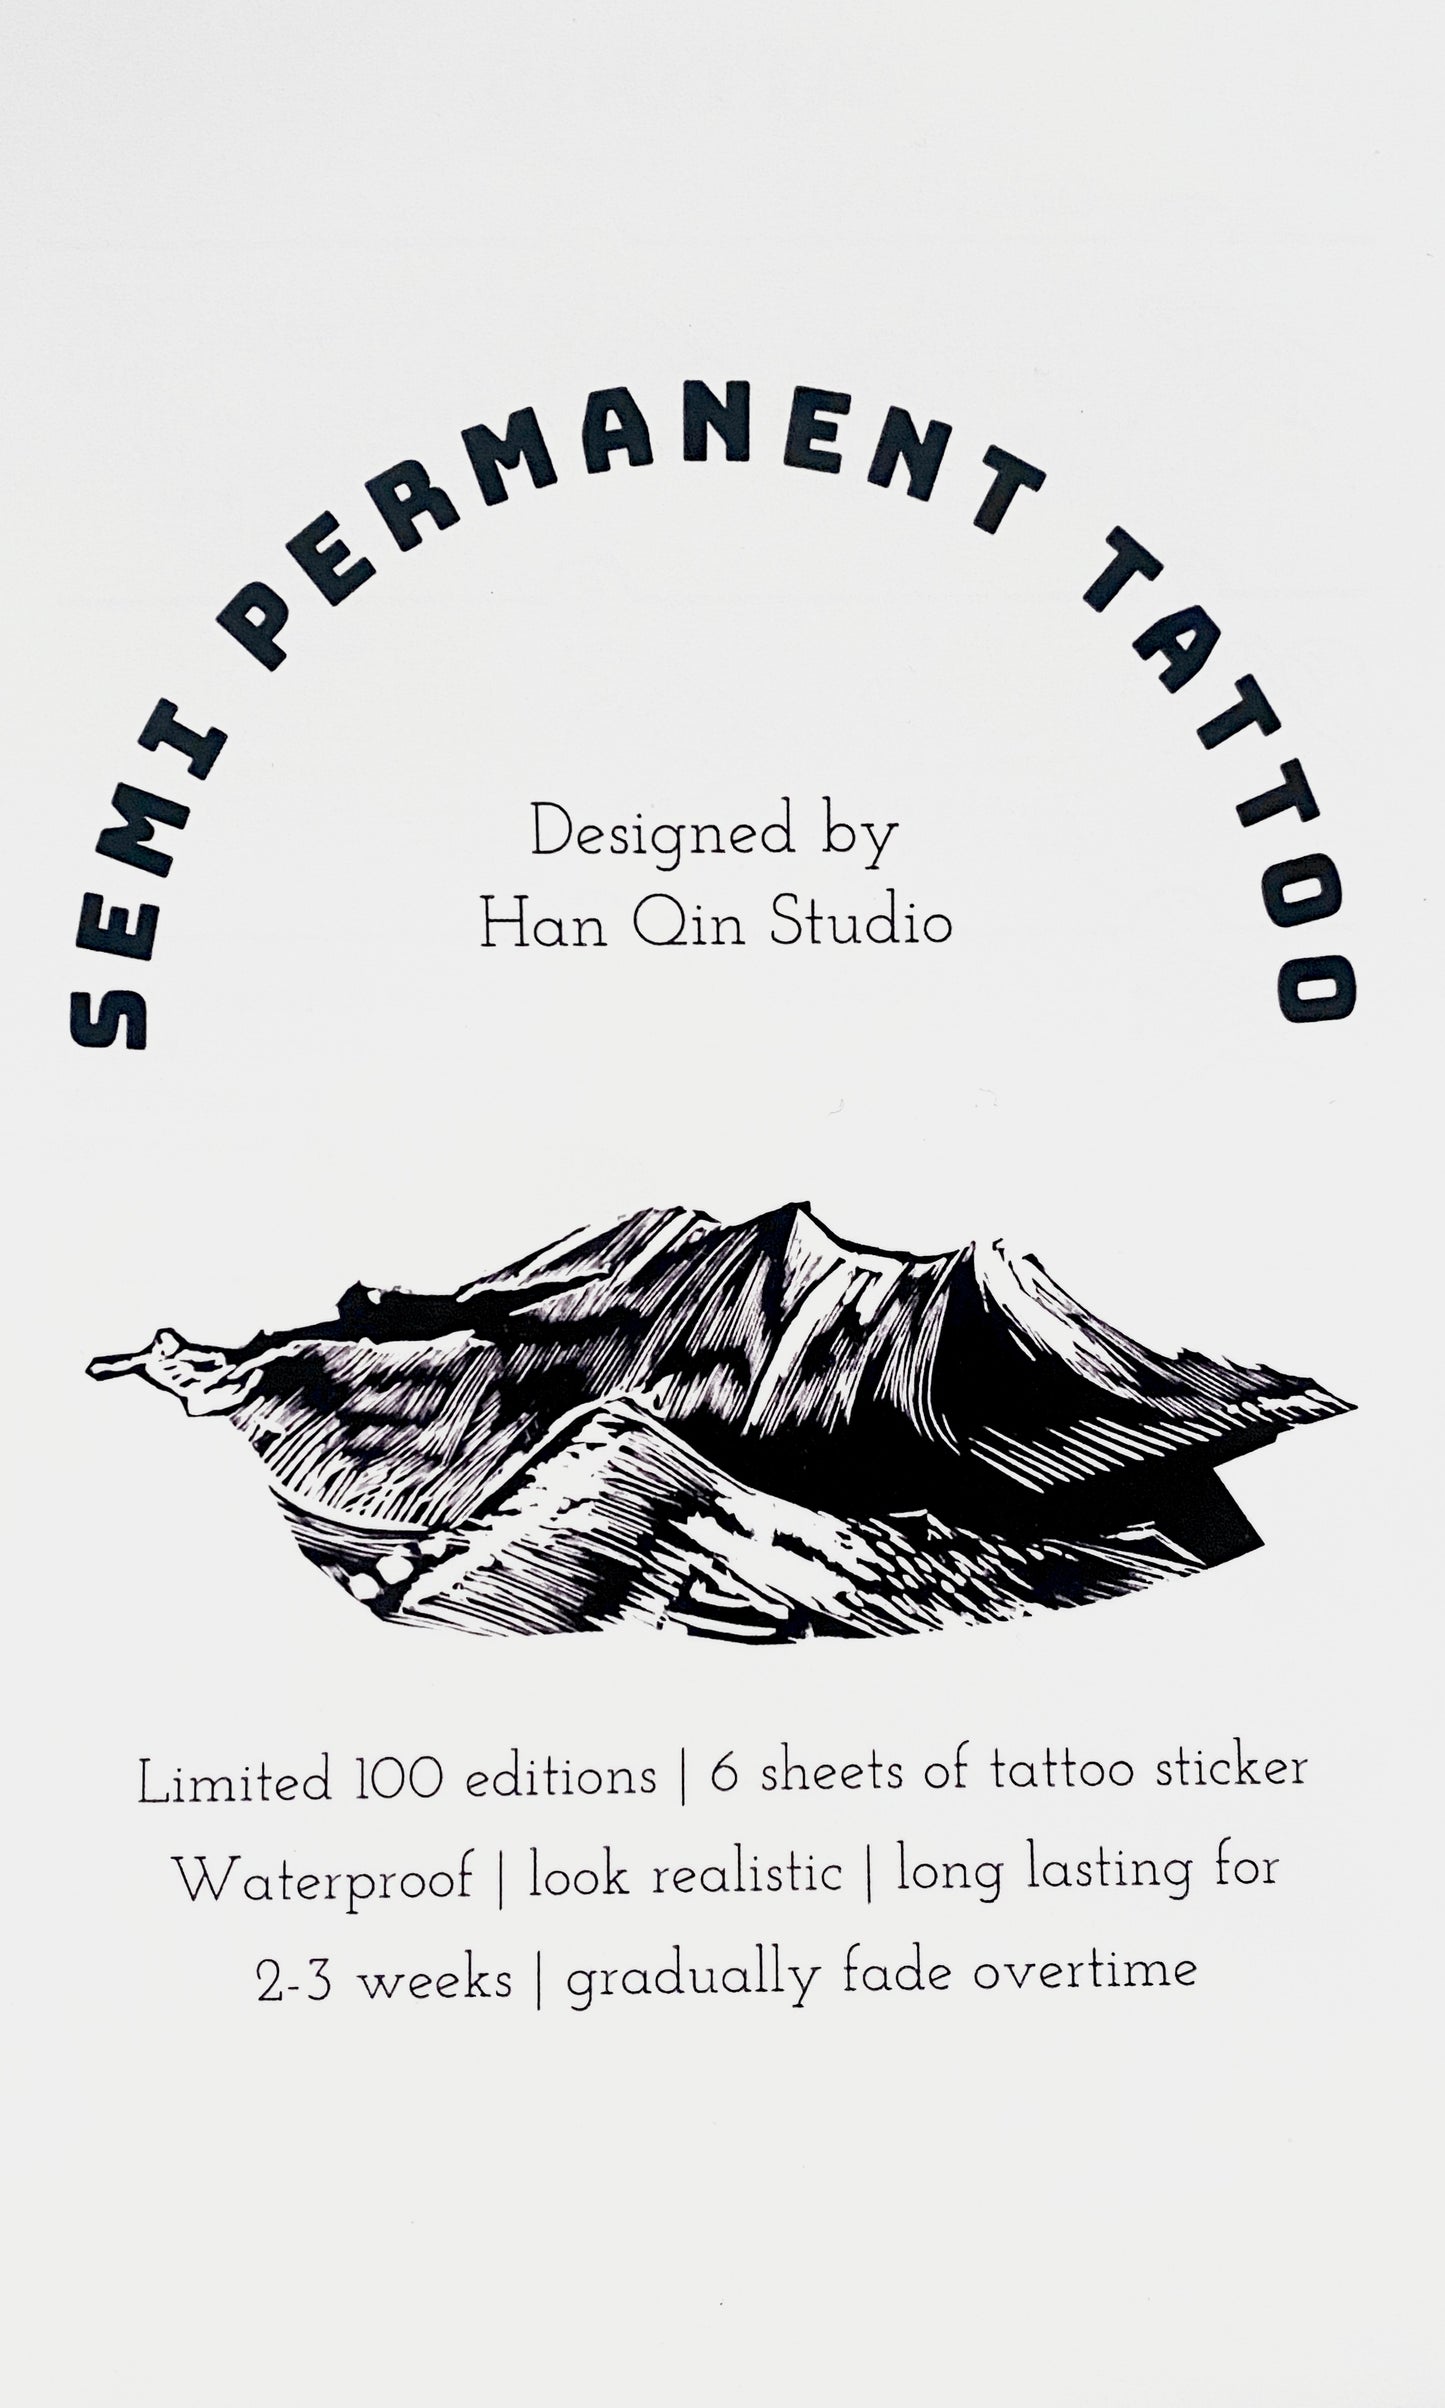 Limited Edition Semi Permanent Art Tattoo collection